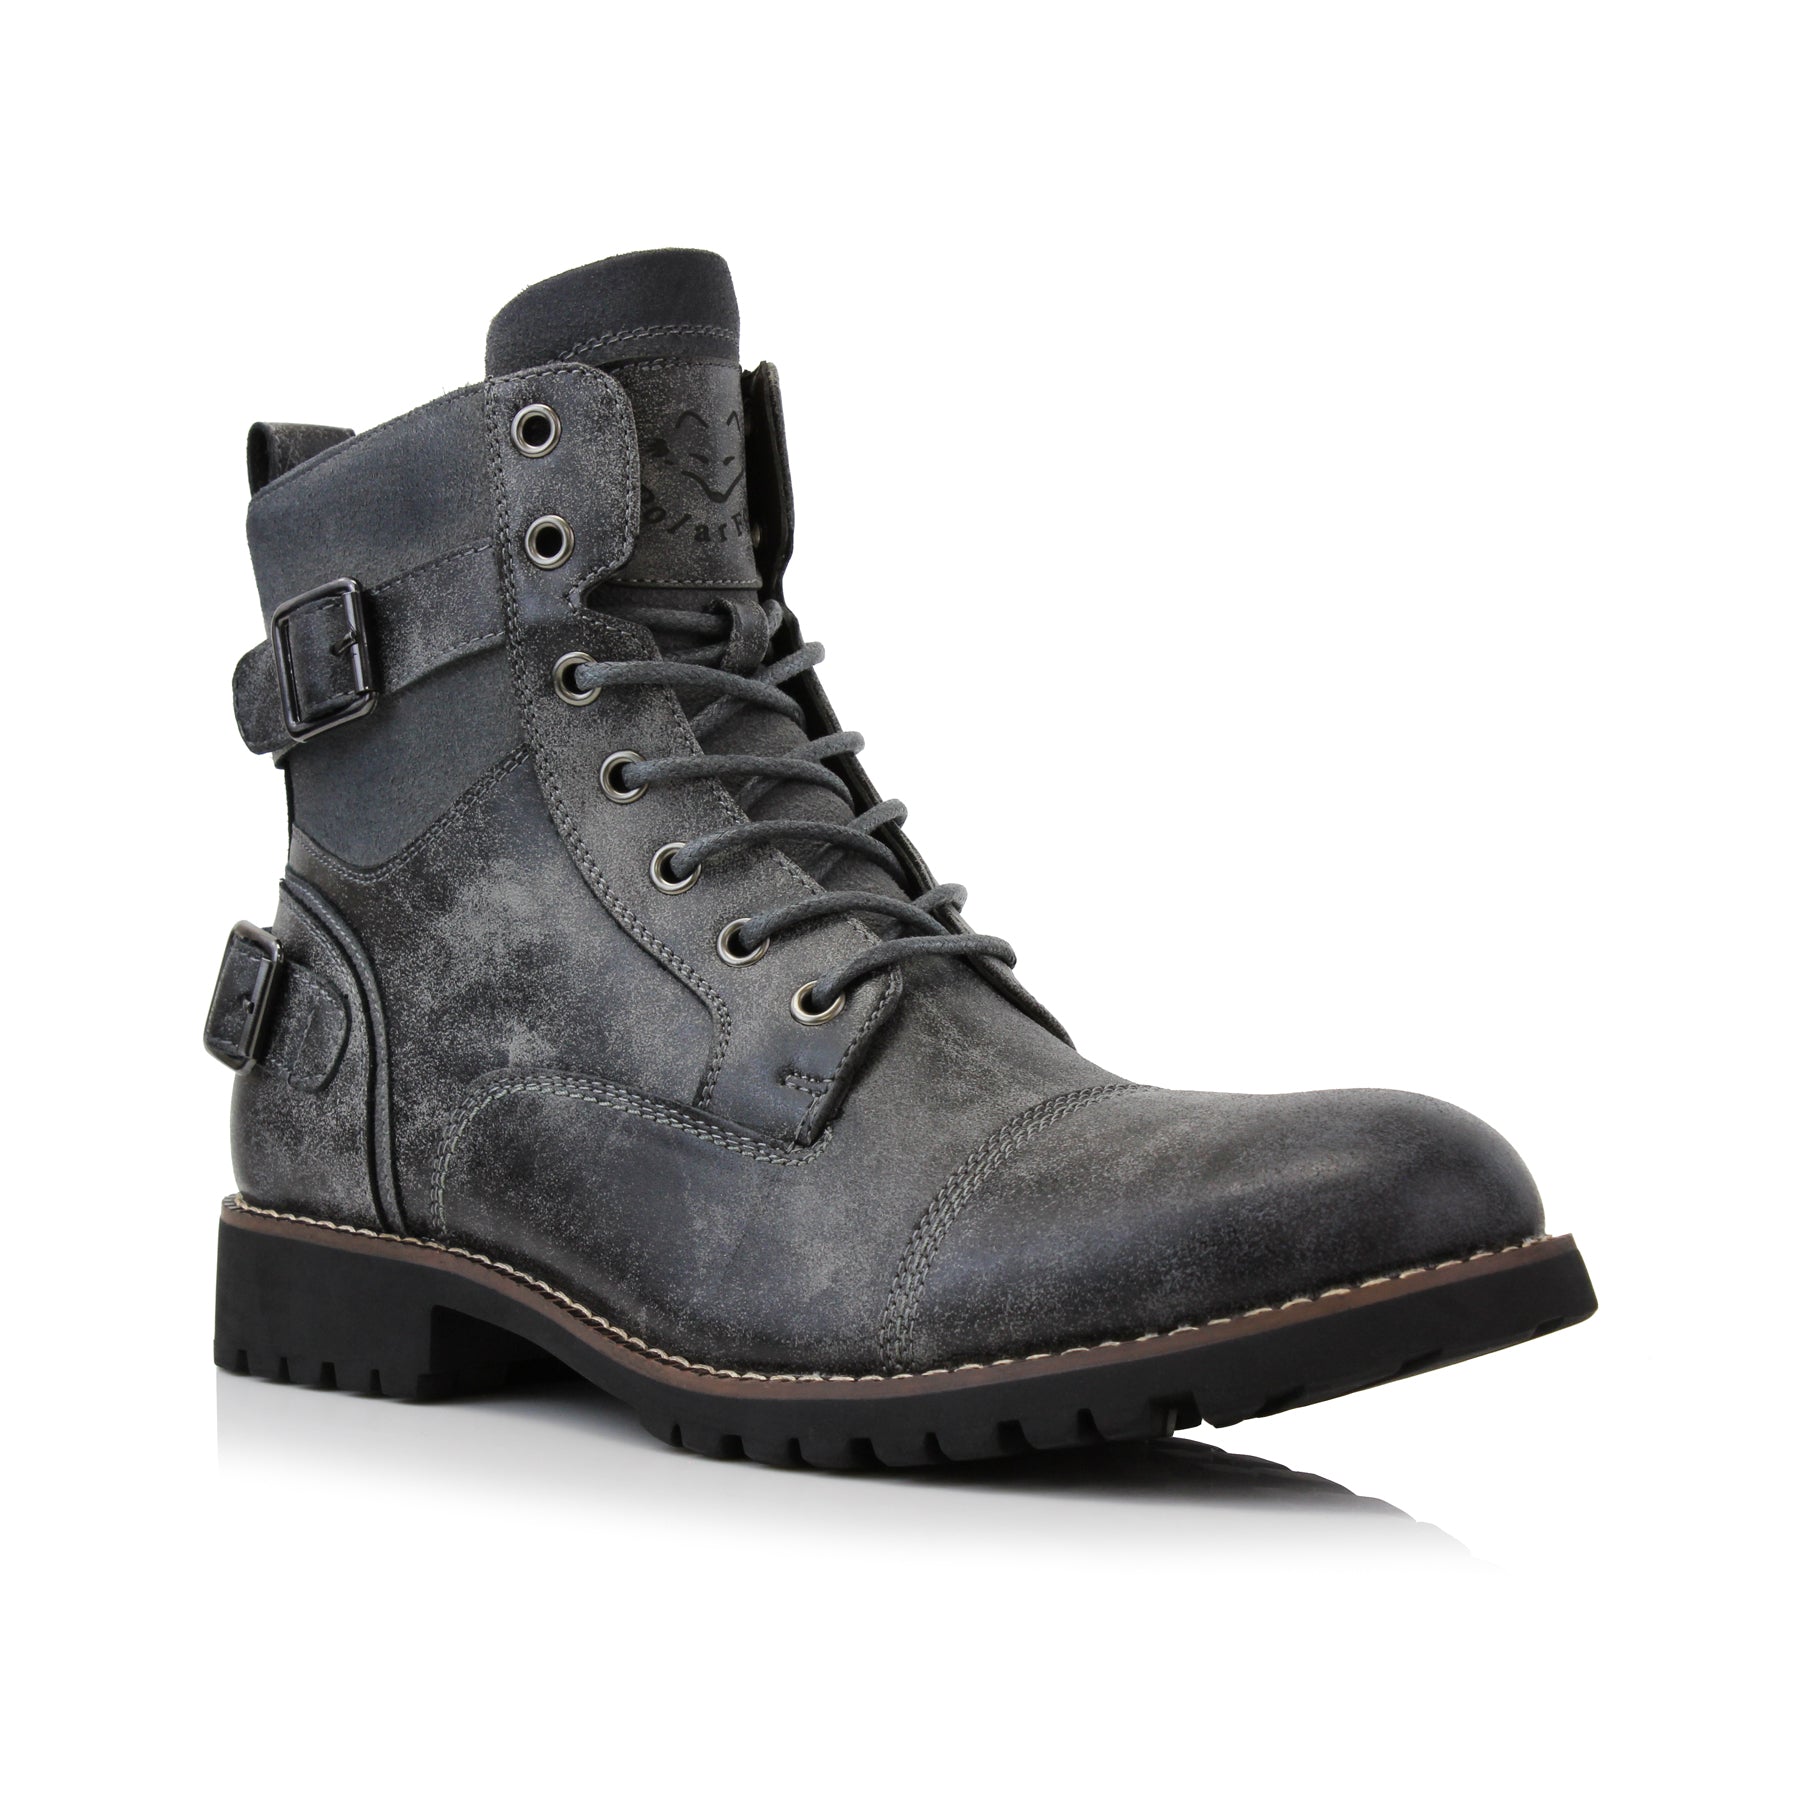 Textured Motorcycle Boots | Christopher | Polar Fox Mid Top Style Shoe